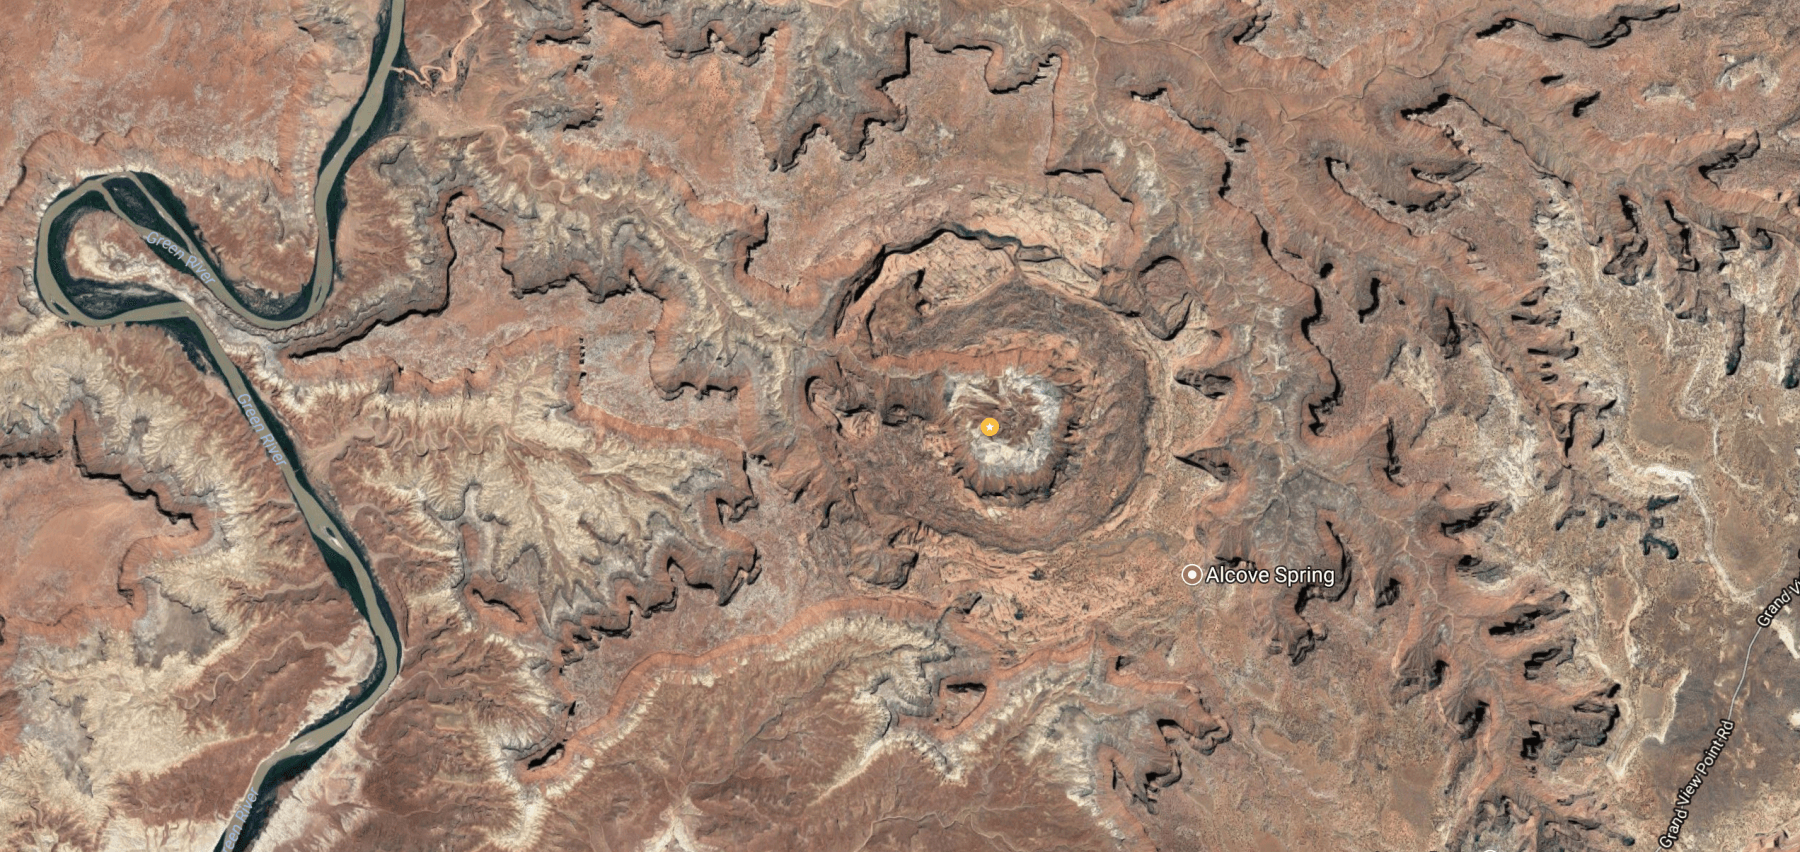 Upheaval Dome at Canyonlands National Park on Google Maps